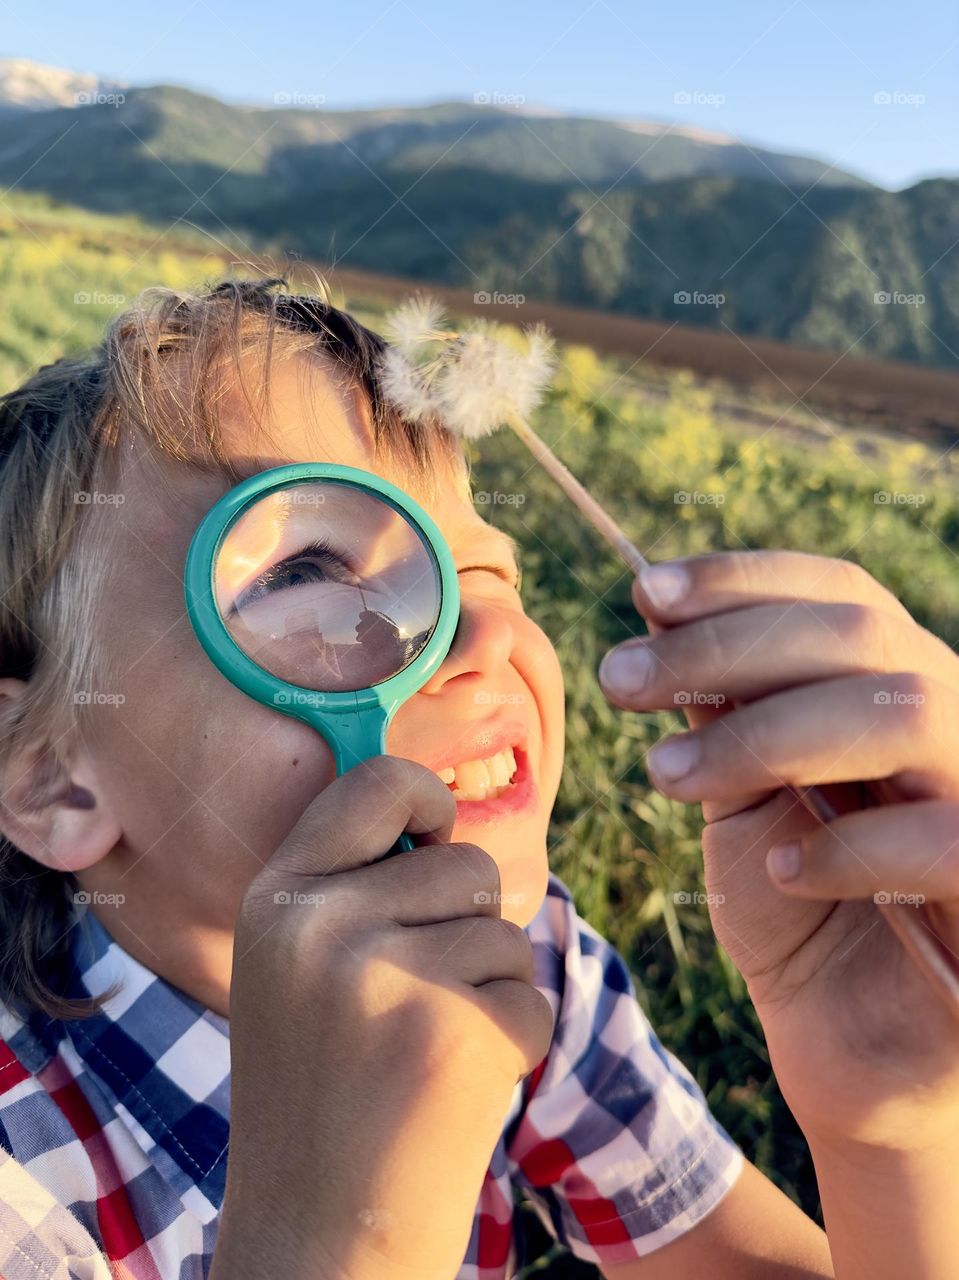 Boy looking at a dandelion through a magnifying glass